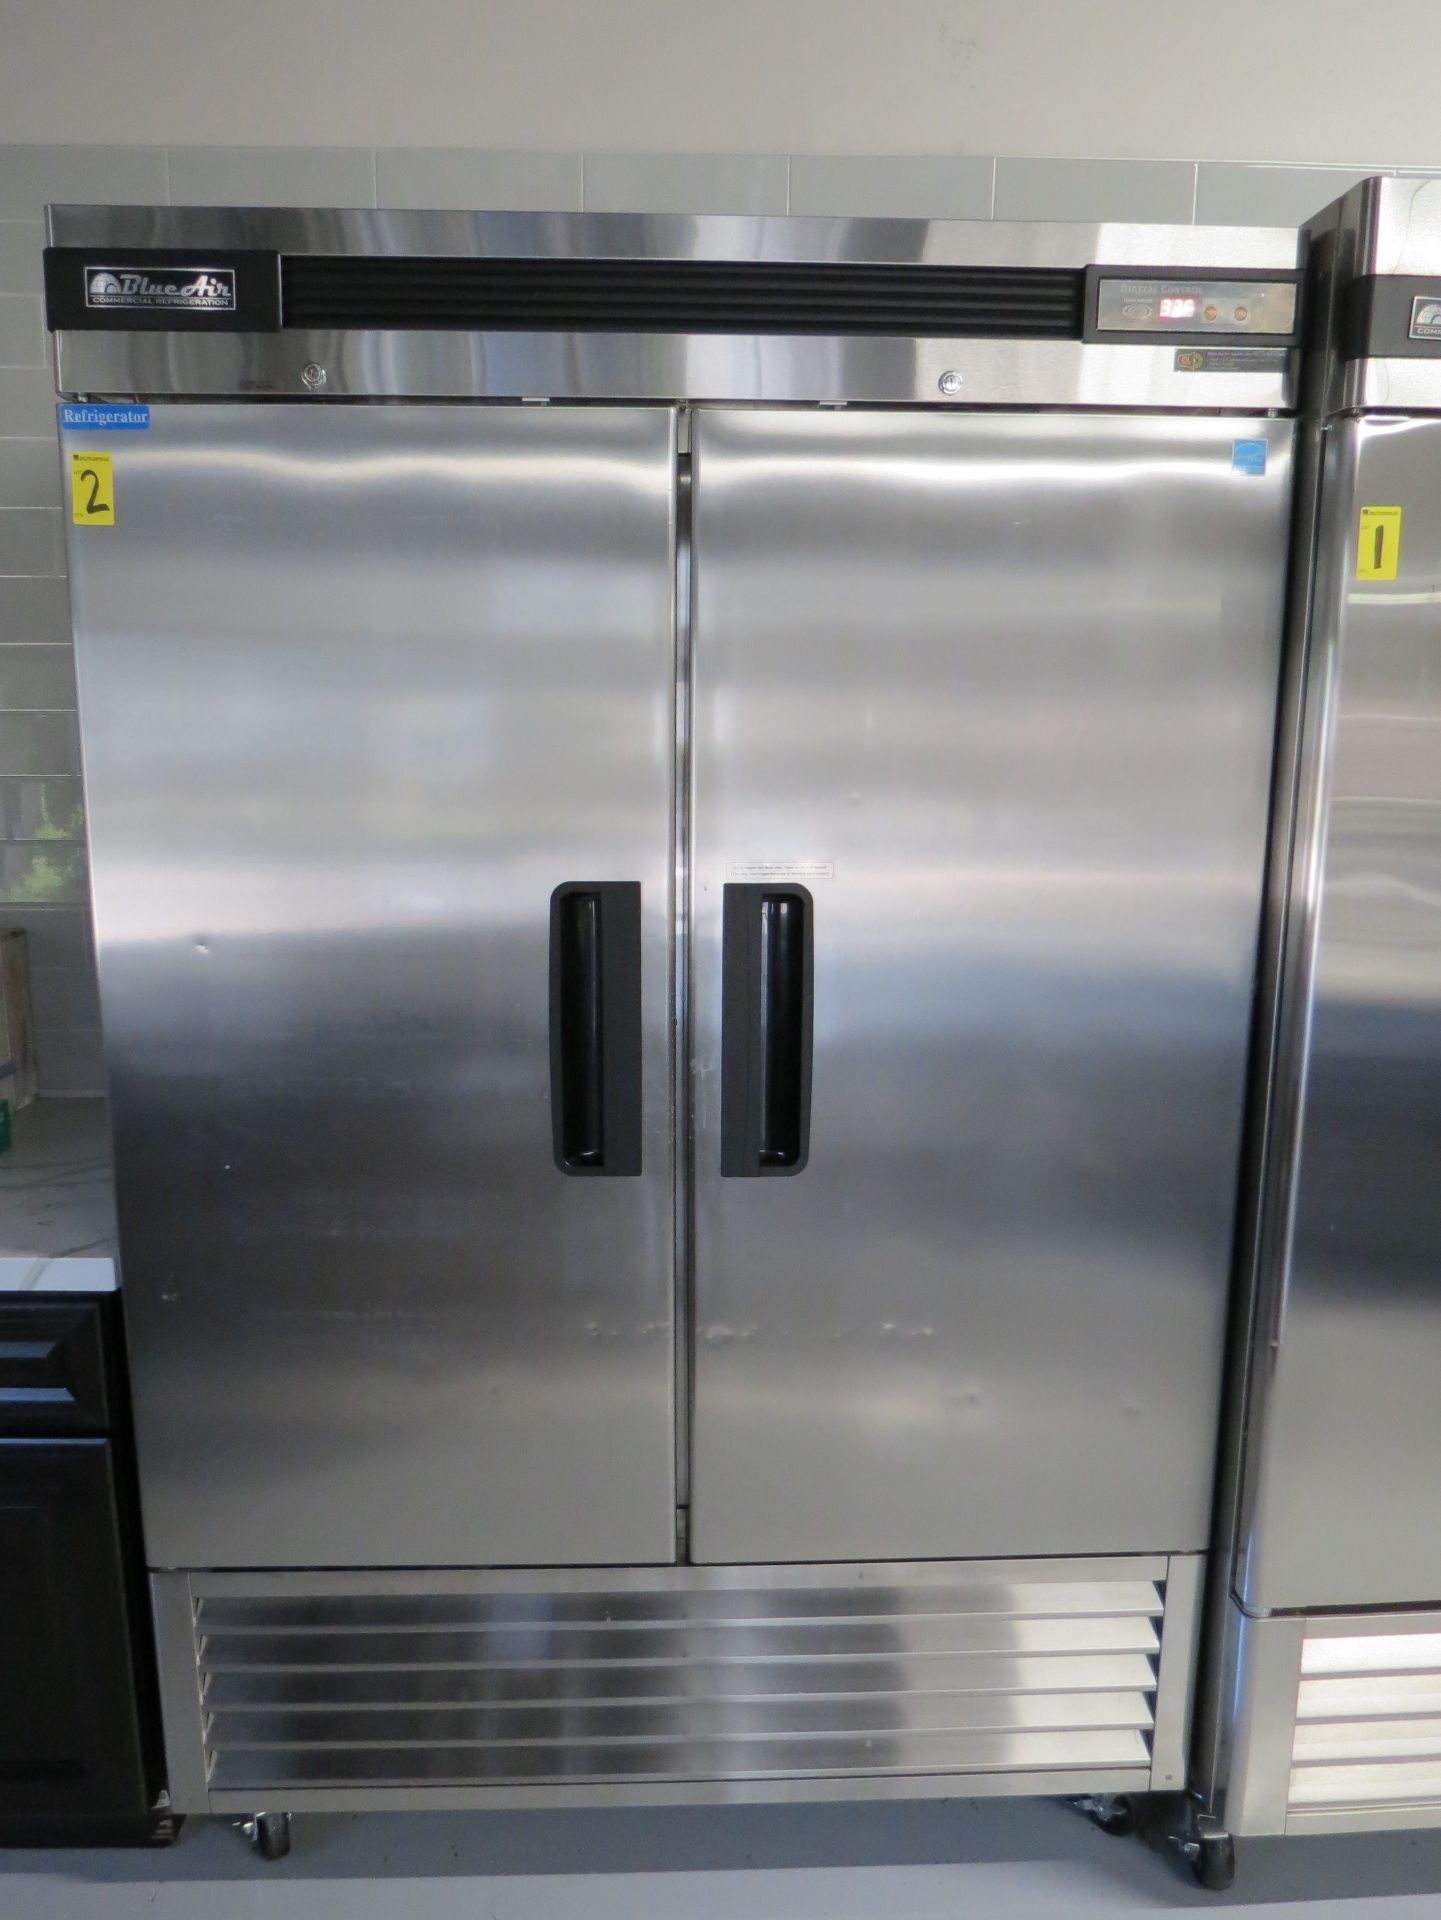 Blue Air Stainless Steel Model BSR49 Commercial Refrigerator with Digital Control